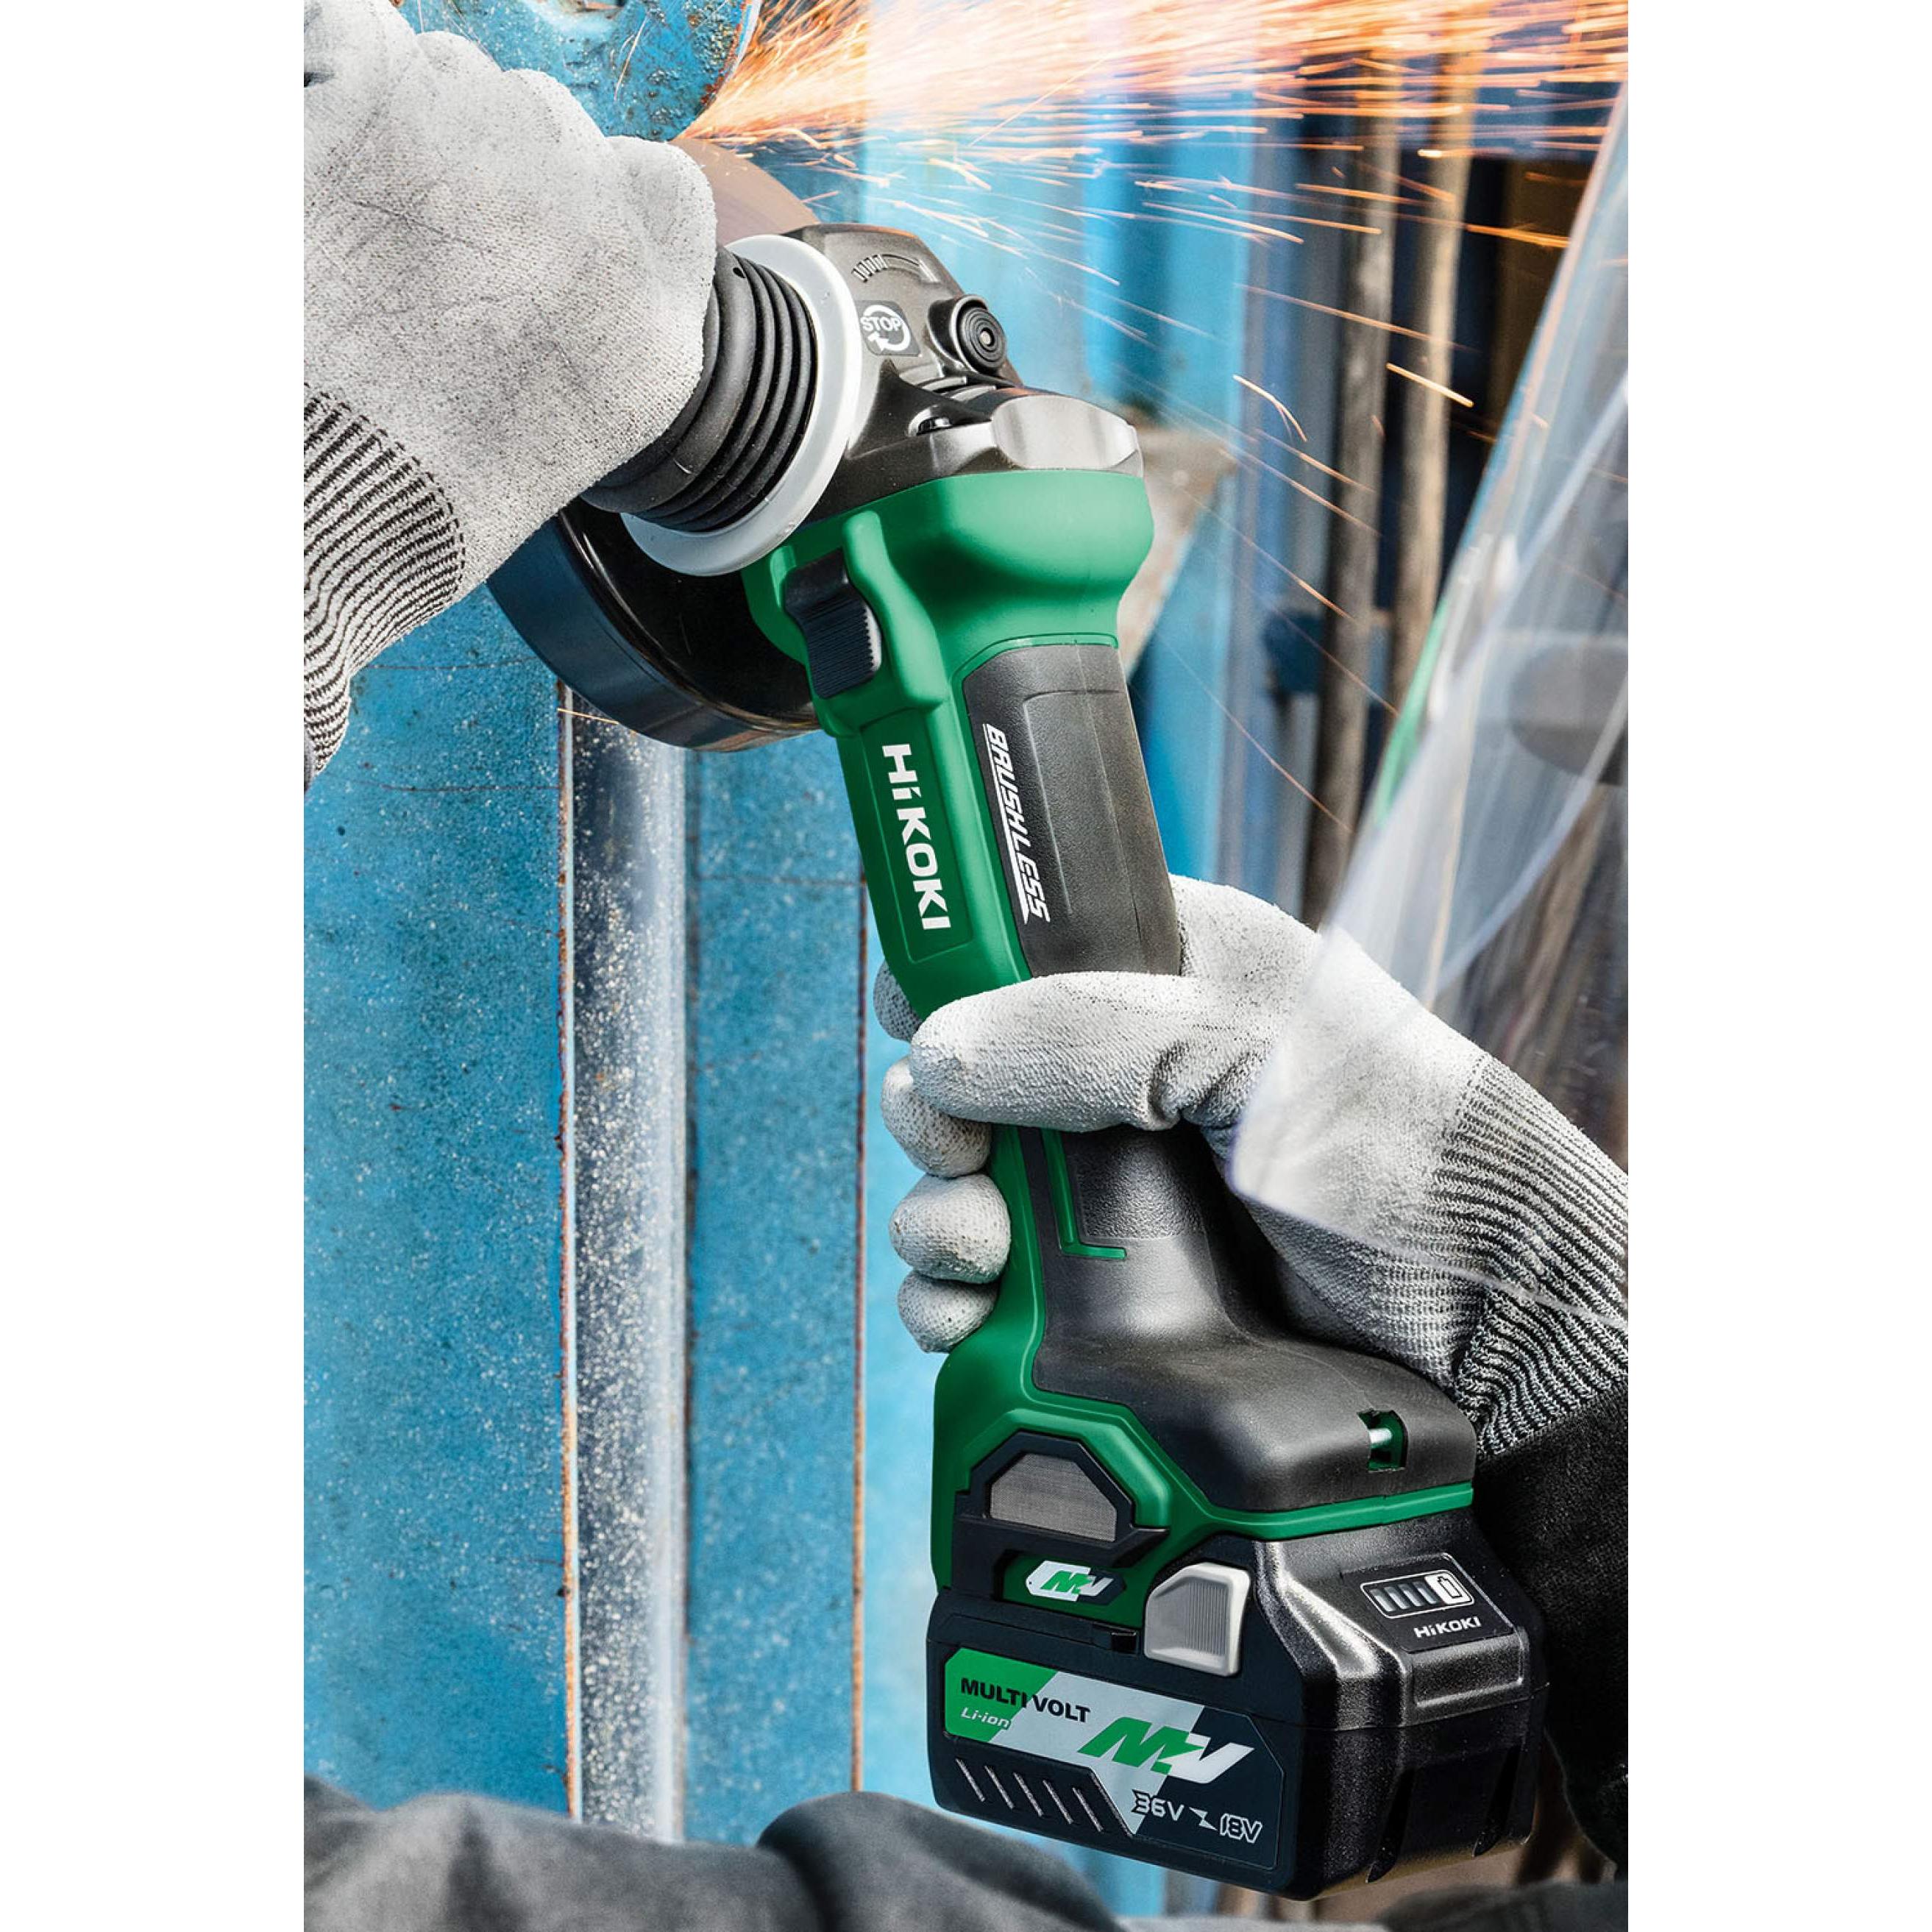 Hikoki Angle Grinder 36V 125Mm paddle solo HTC-G3613DB-W2 Power Tool Services